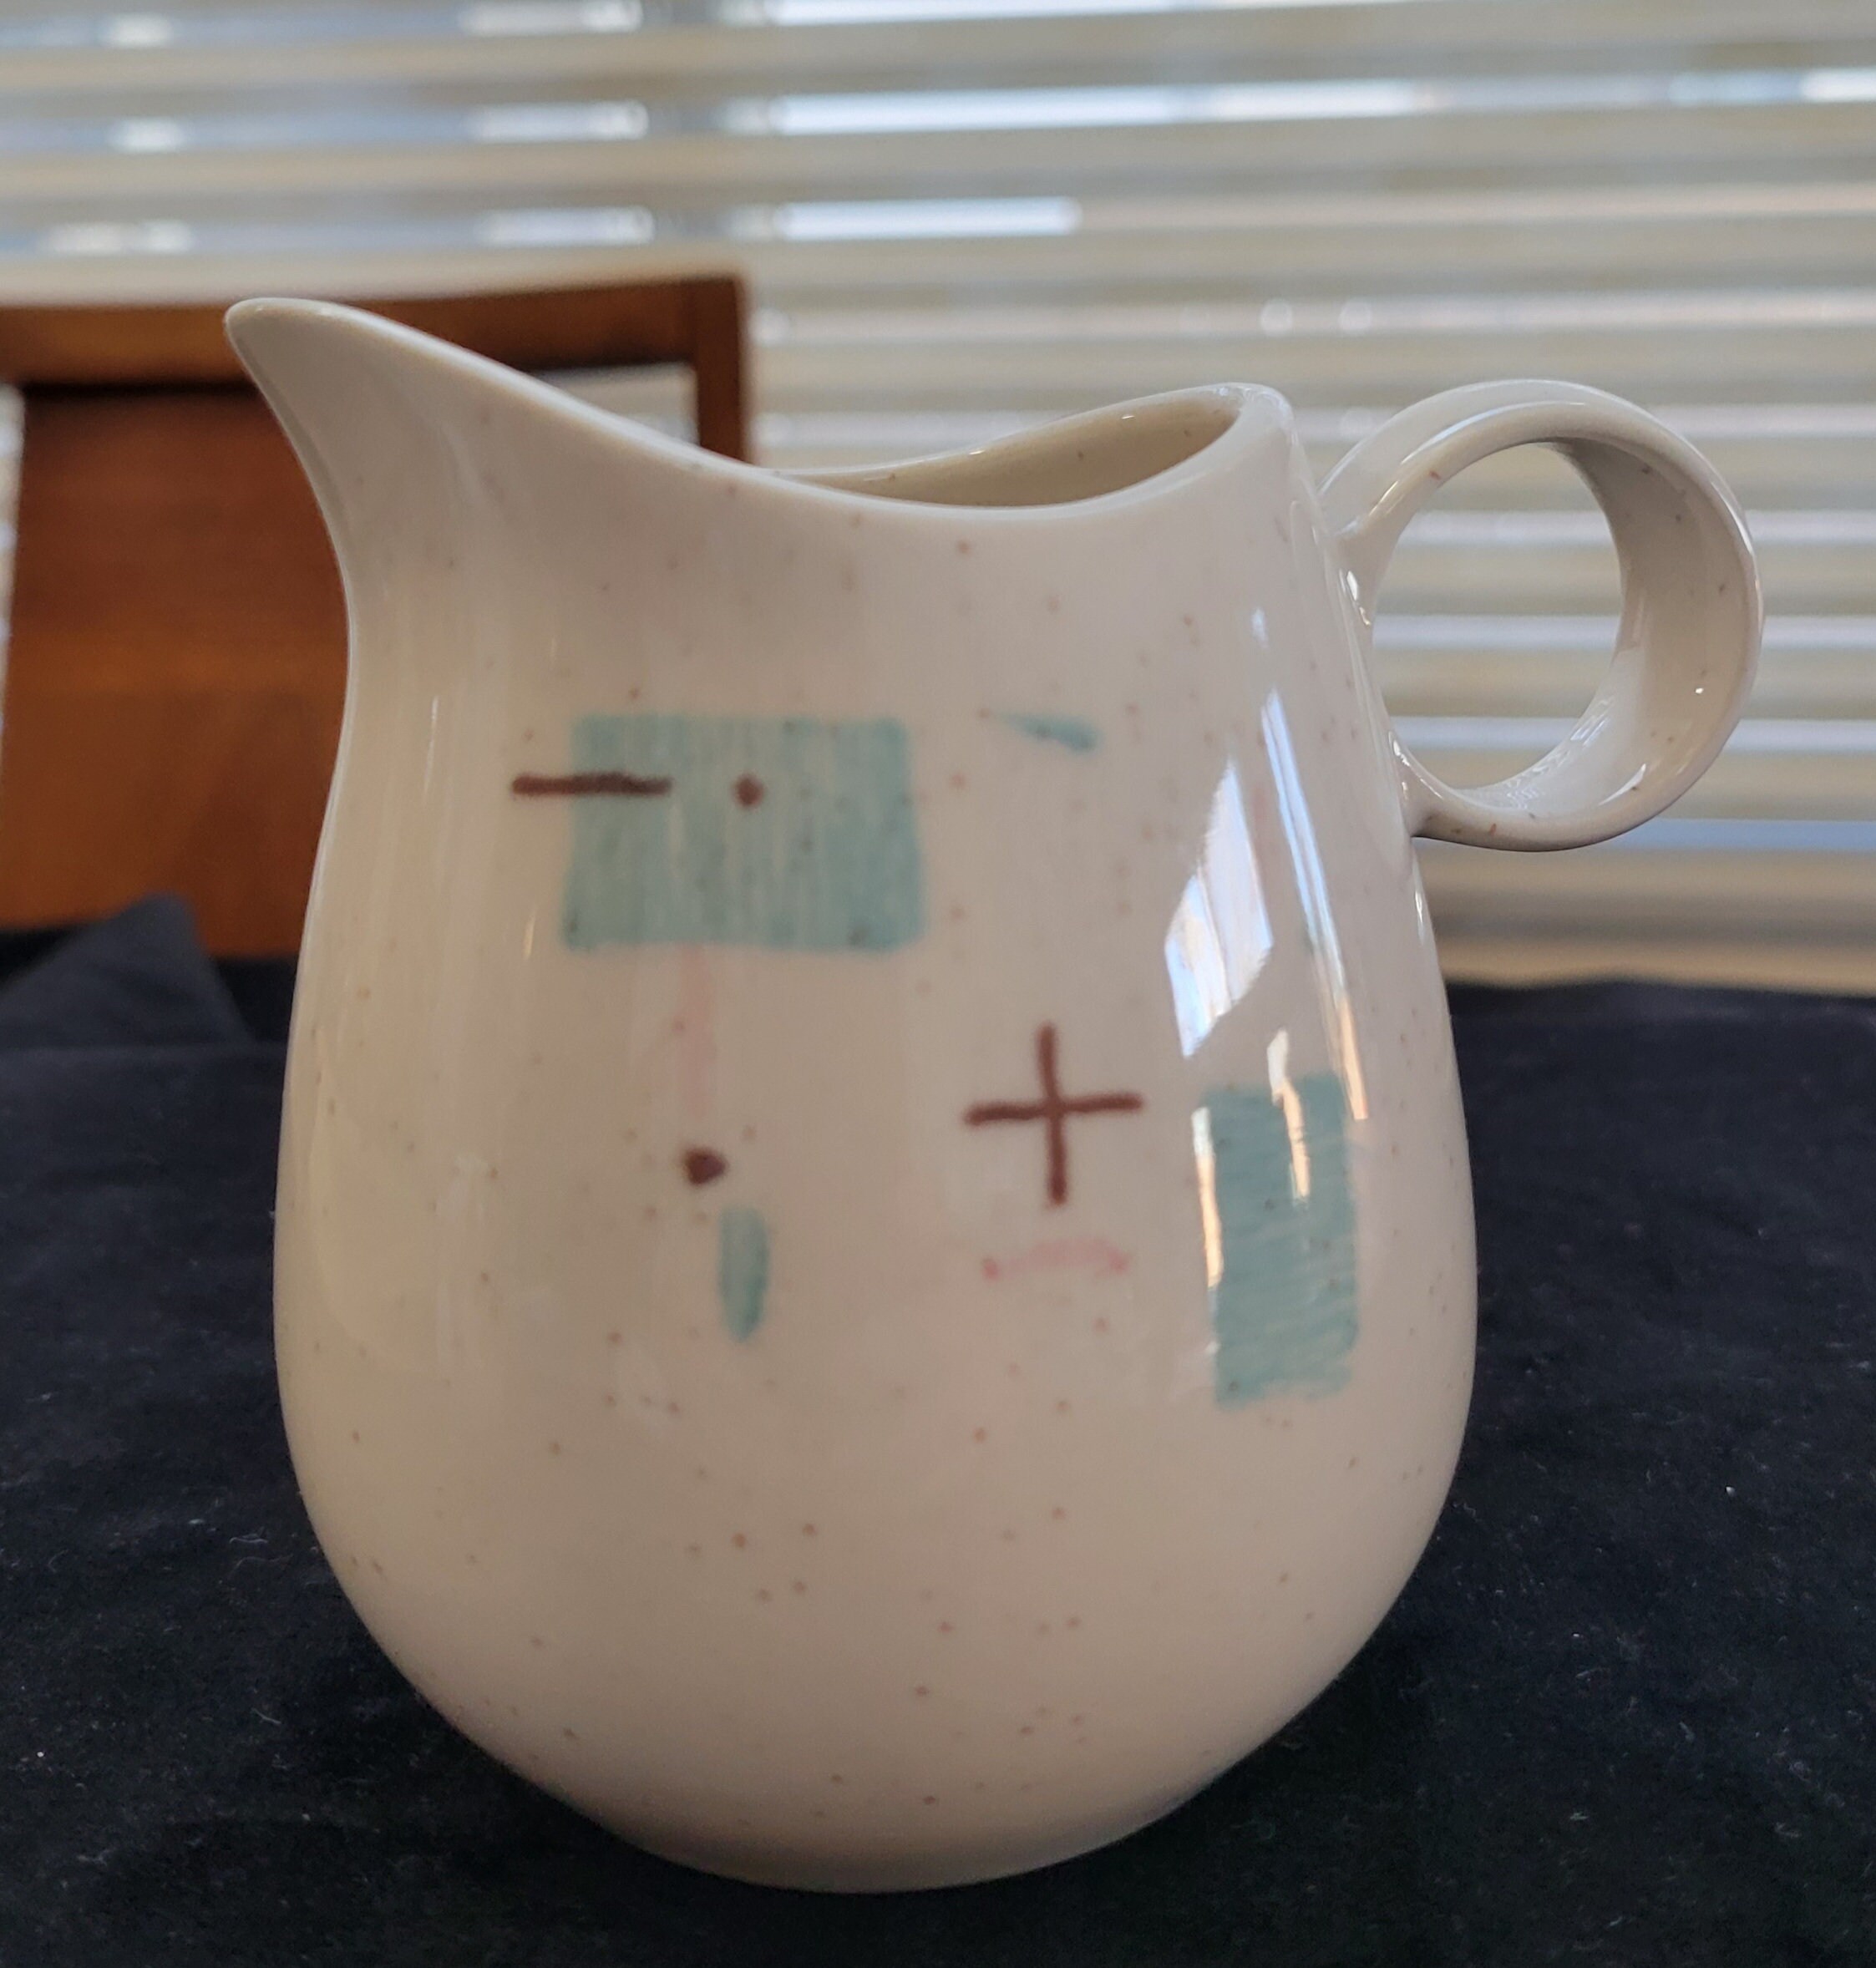 Vernonware Trade Winds Small Serving Pitcher